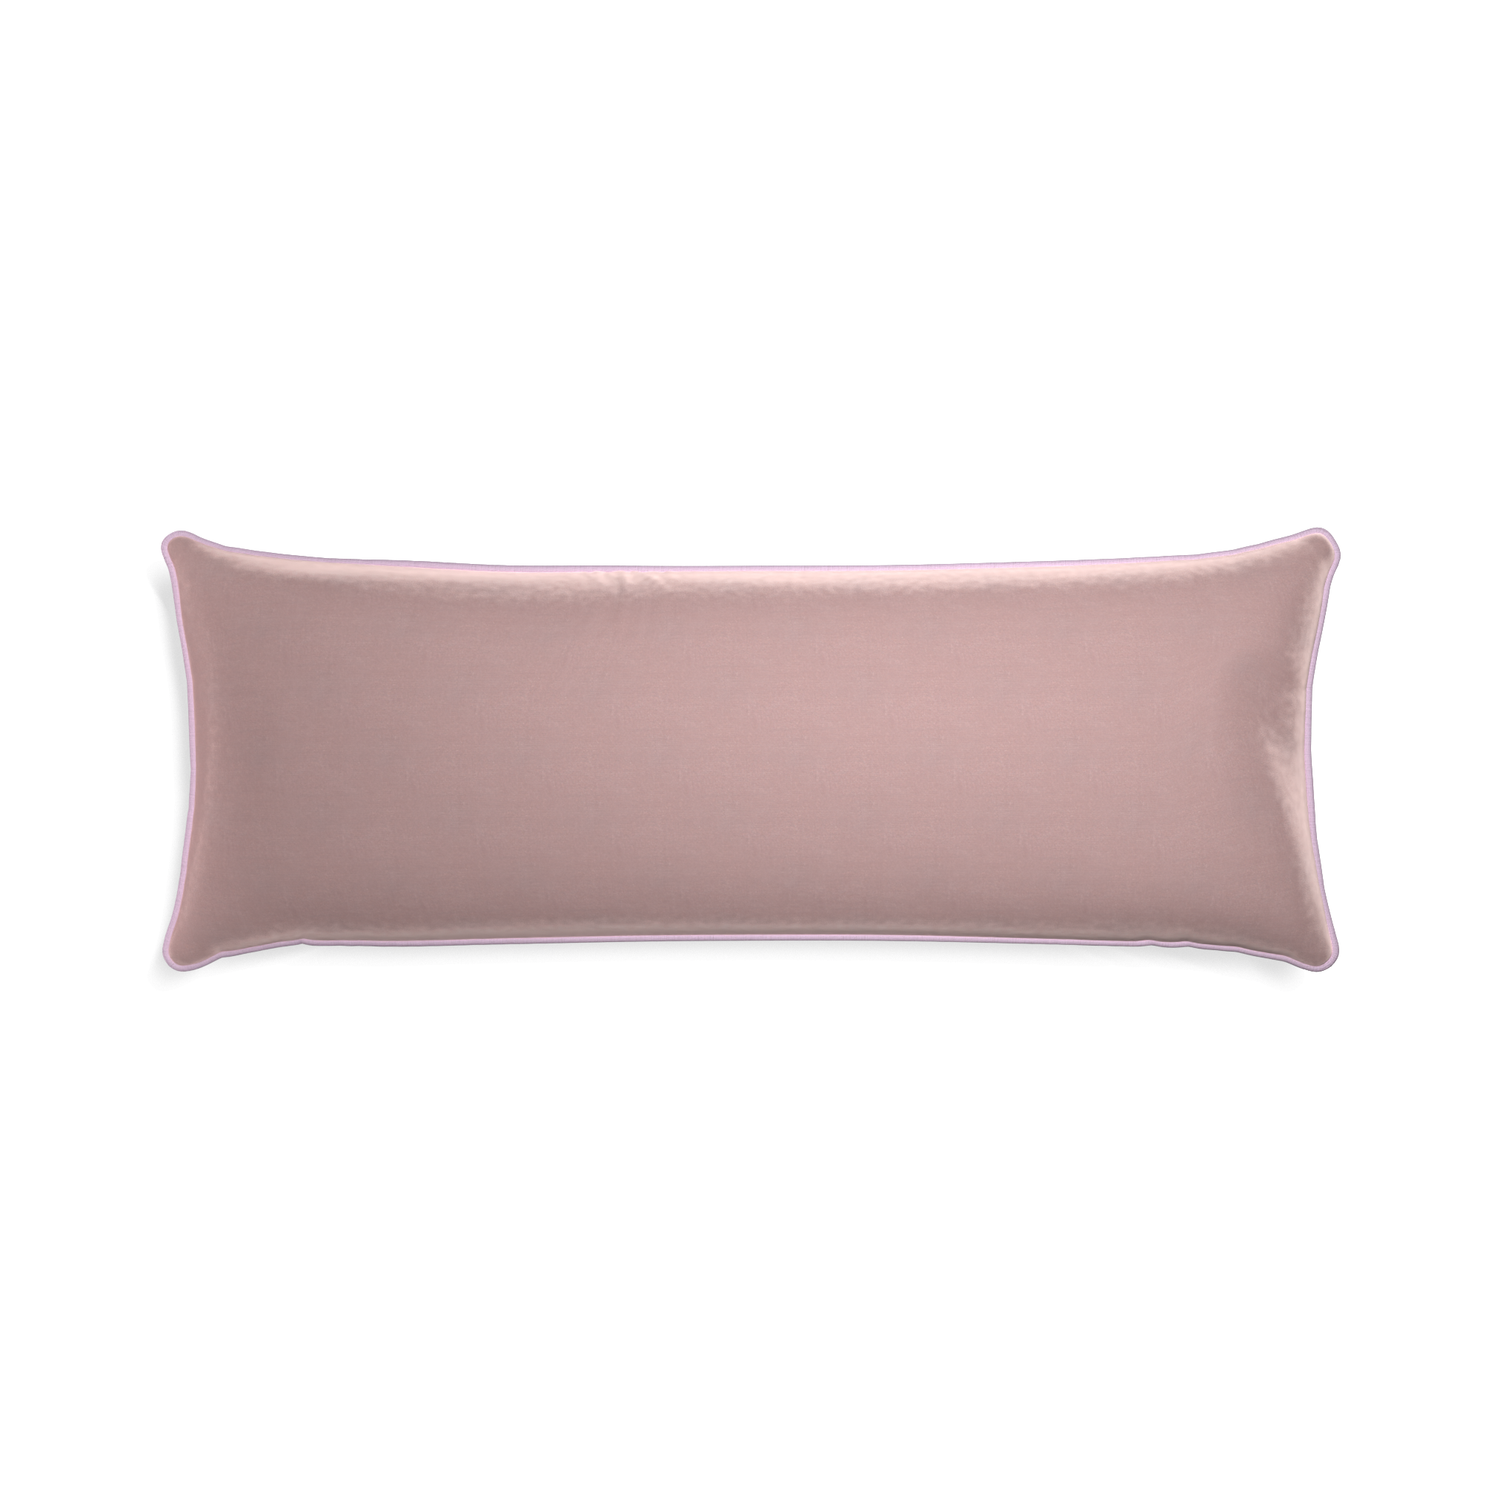 Xl-lumbar mauve velvet custom pillow with l piping on white background